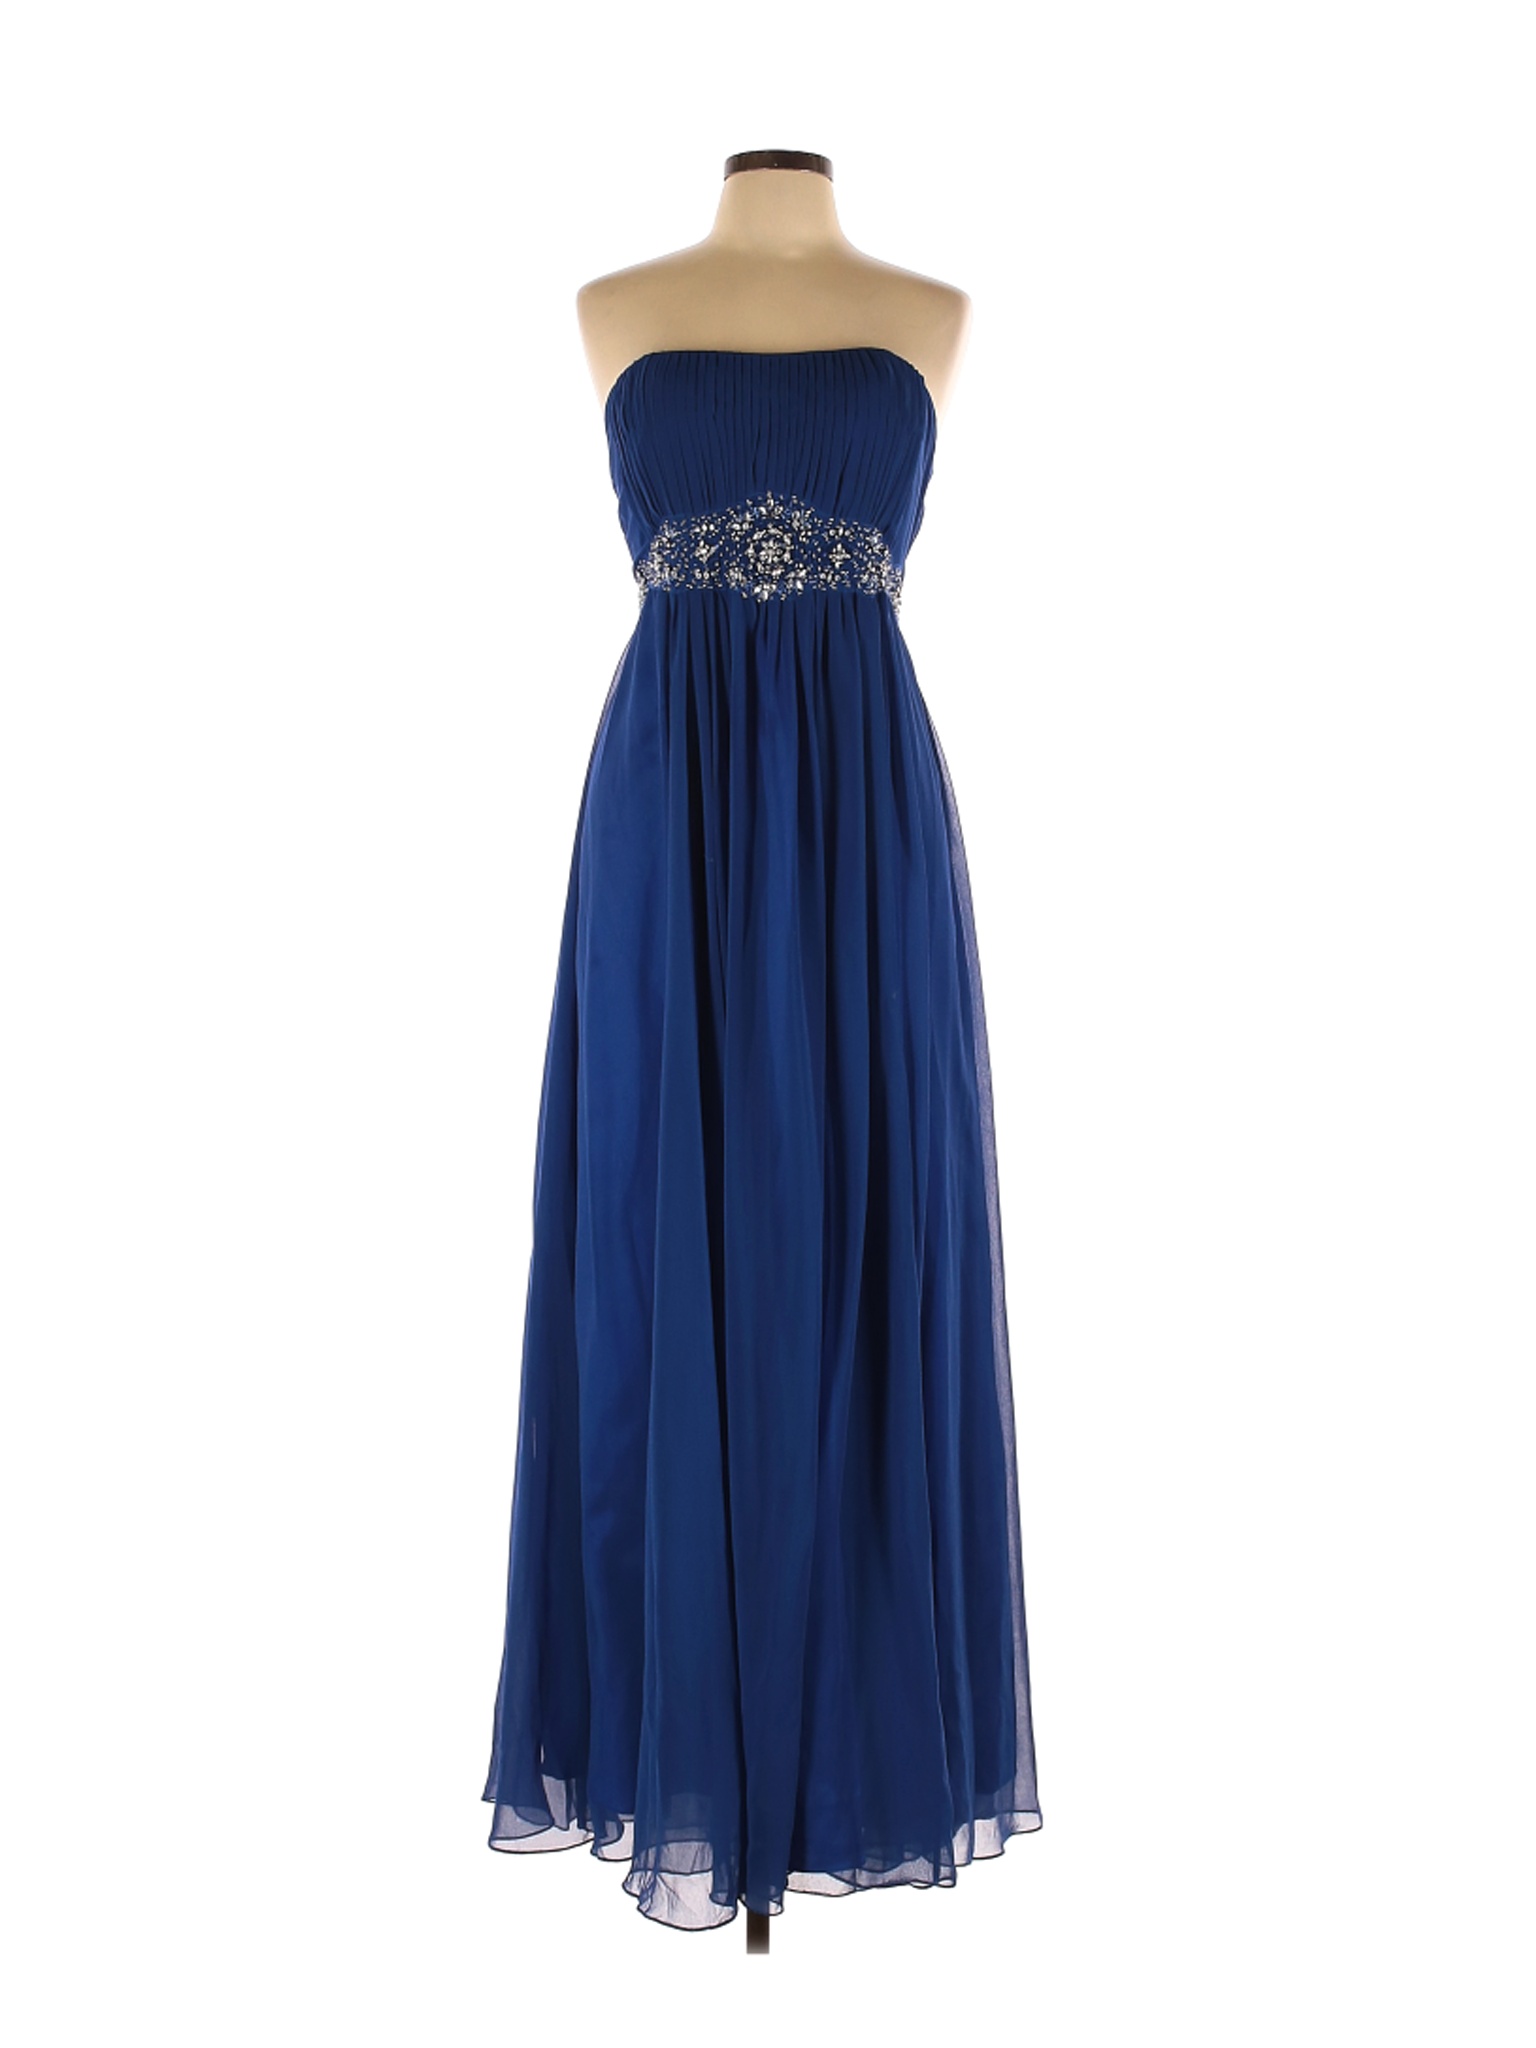 May Queen Couture 100% Polyester Solid Blue Cocktail Dress Size 10 - 73 ...